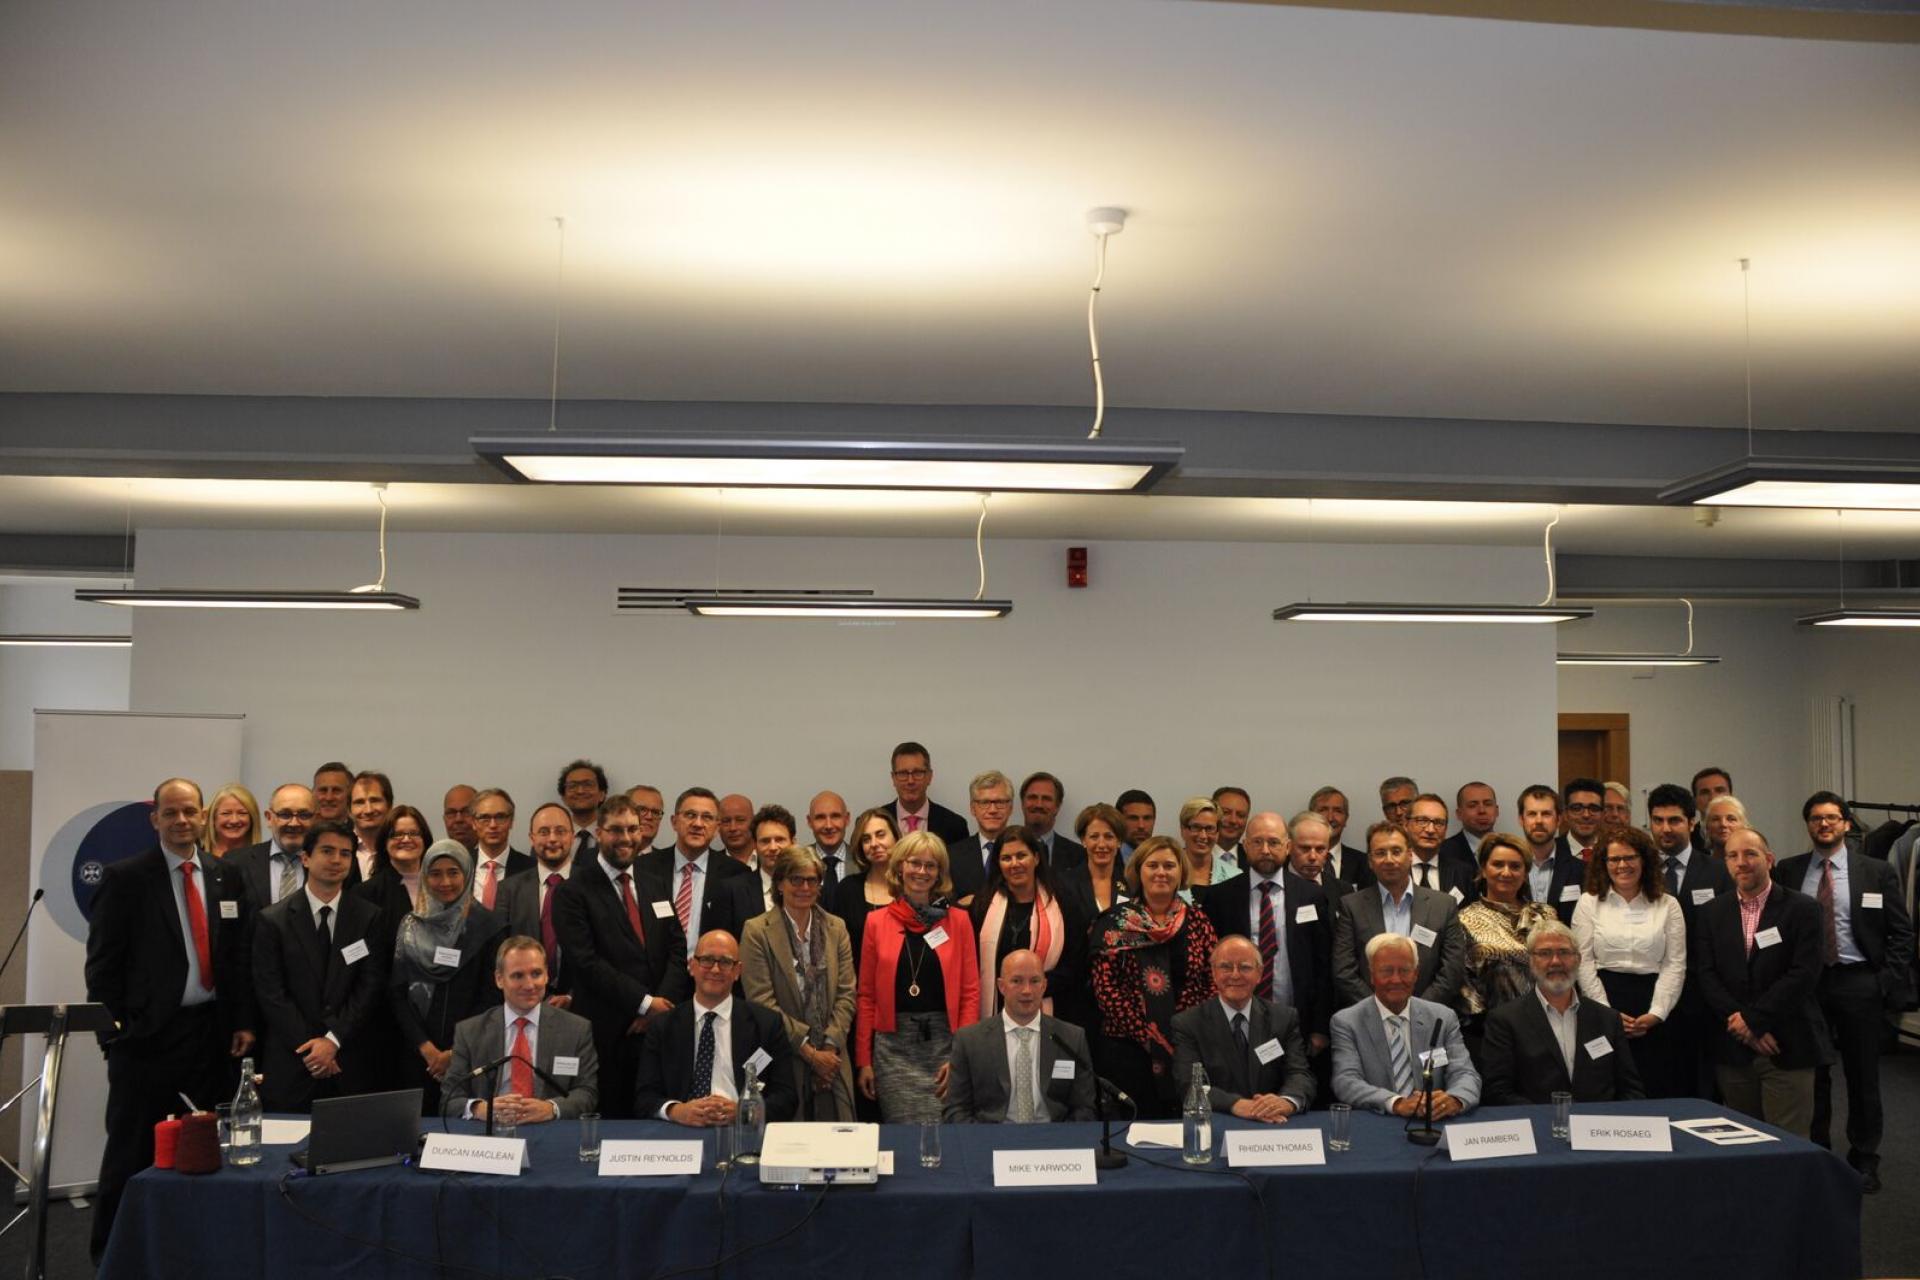 Group photo at Freight Forwarding conference